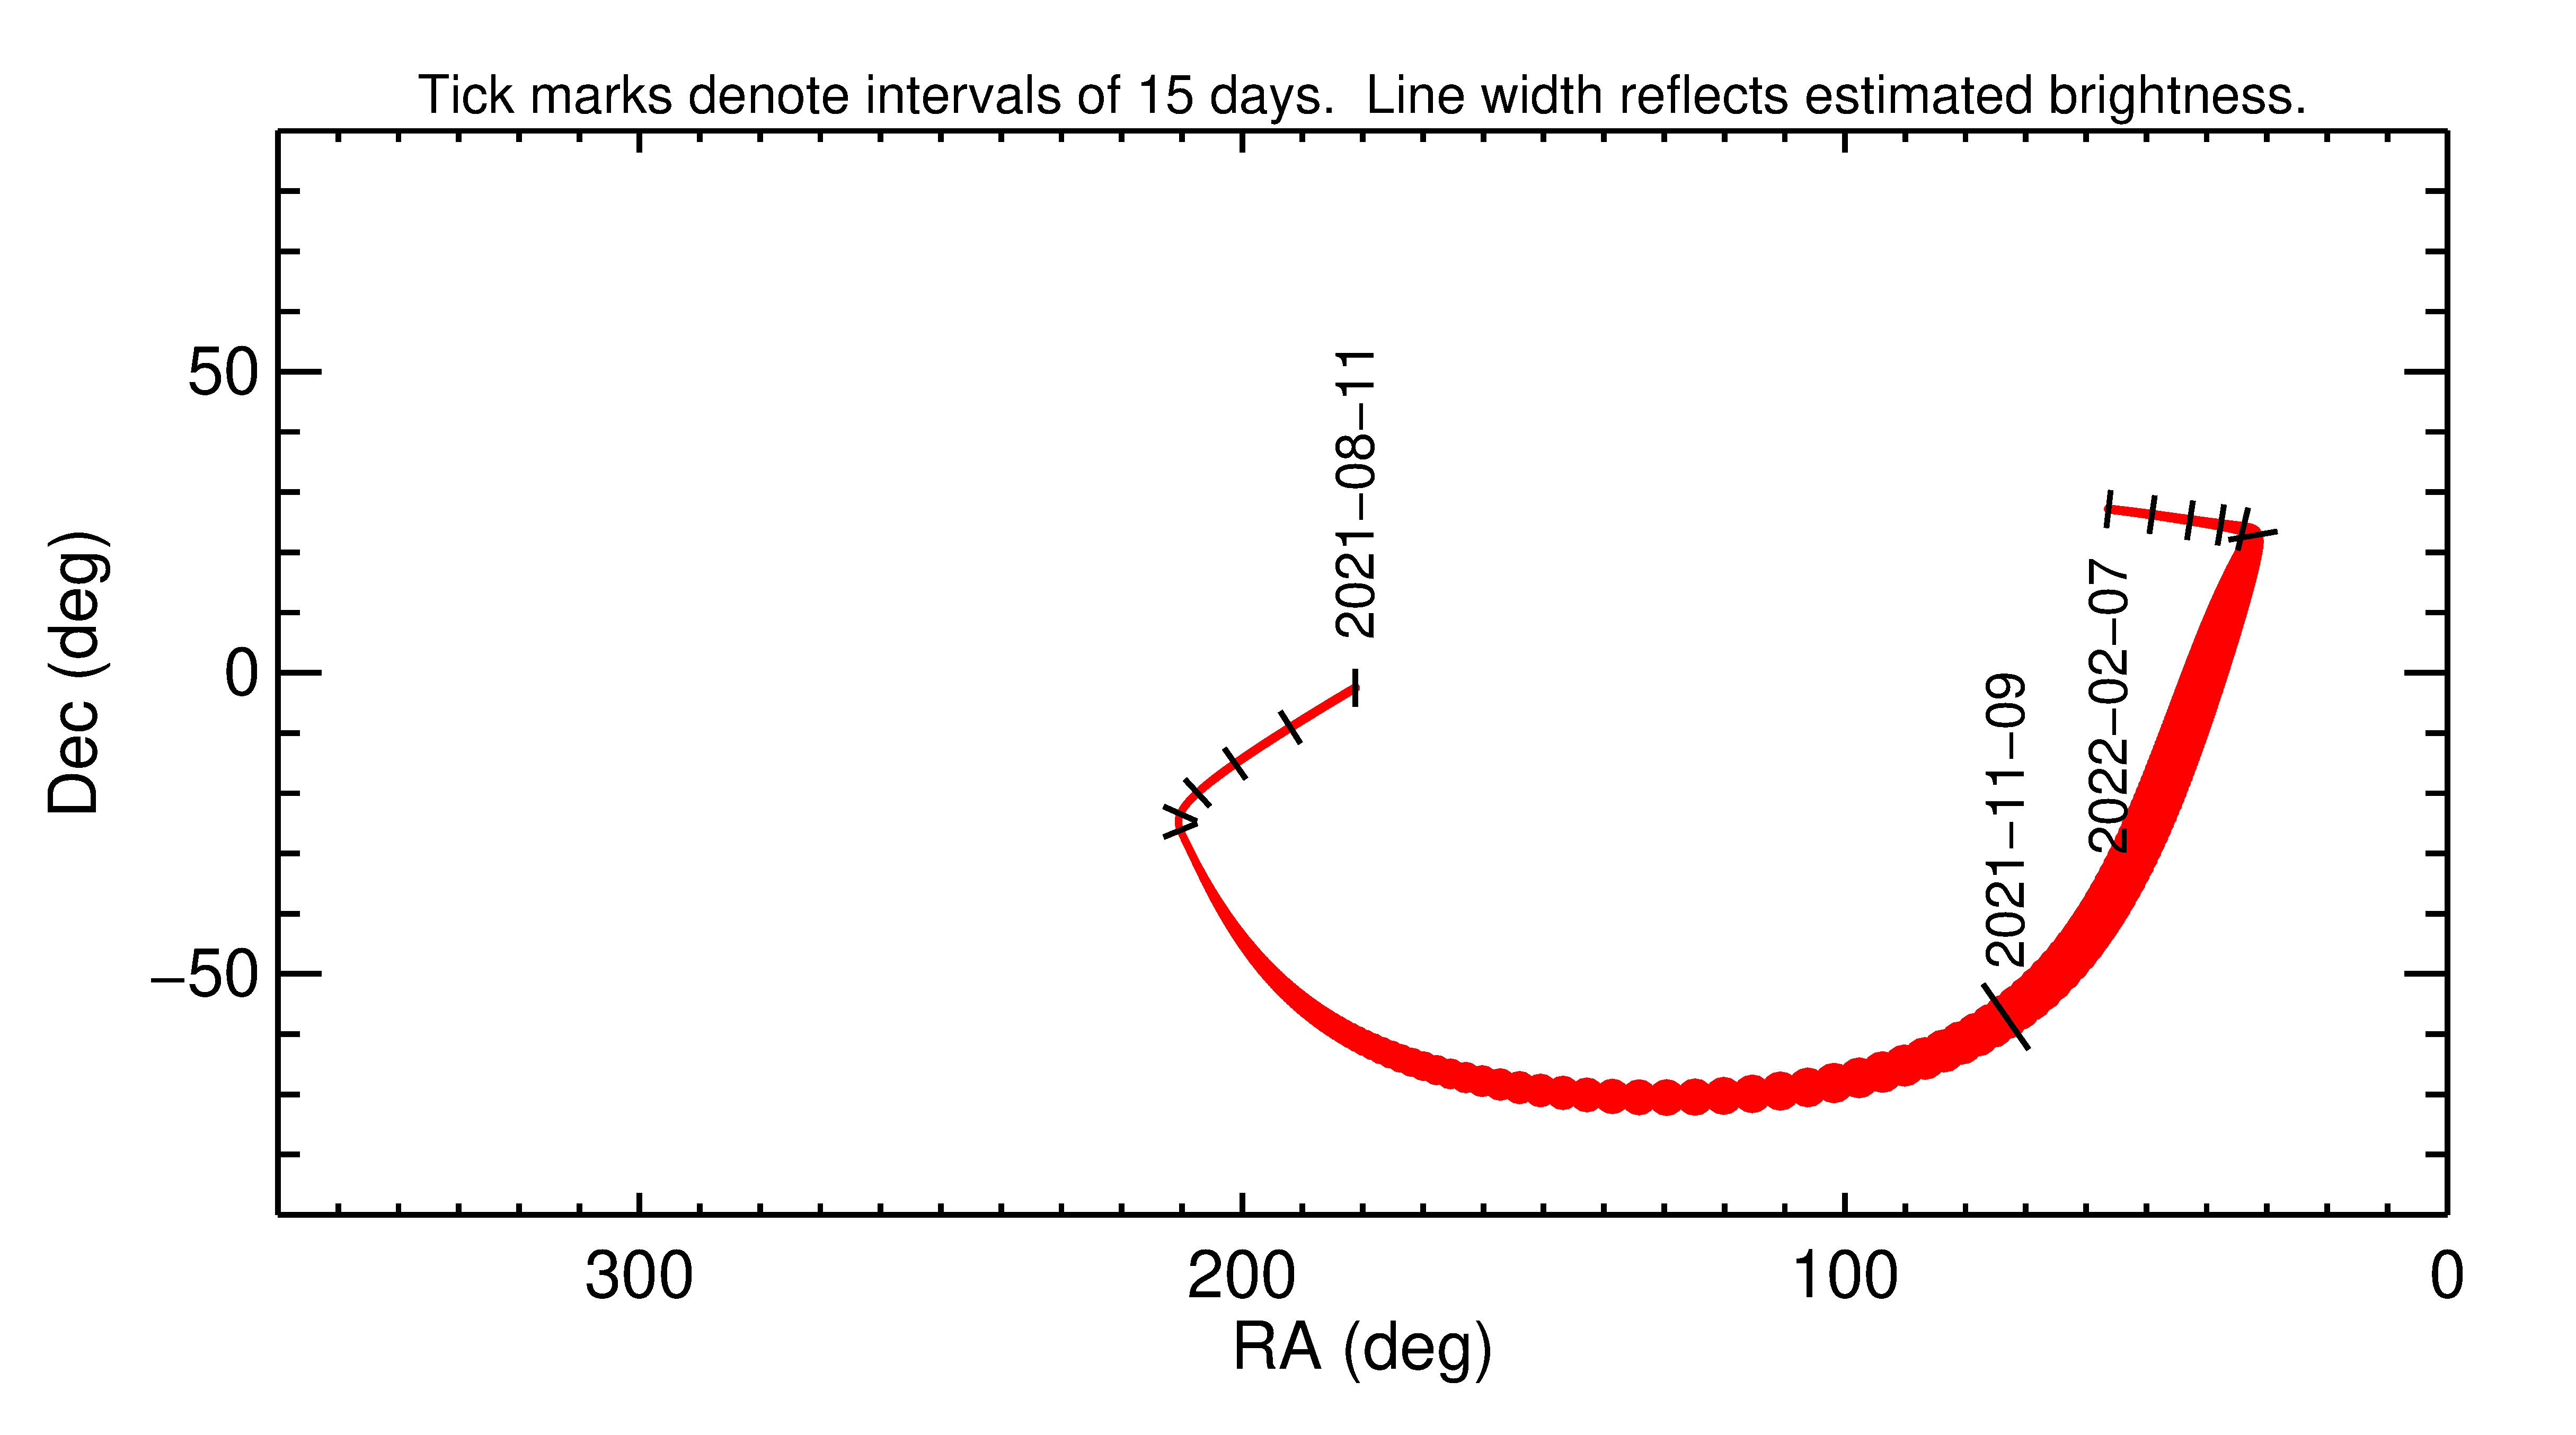 2021 Plot of the object's RA And Dec positions